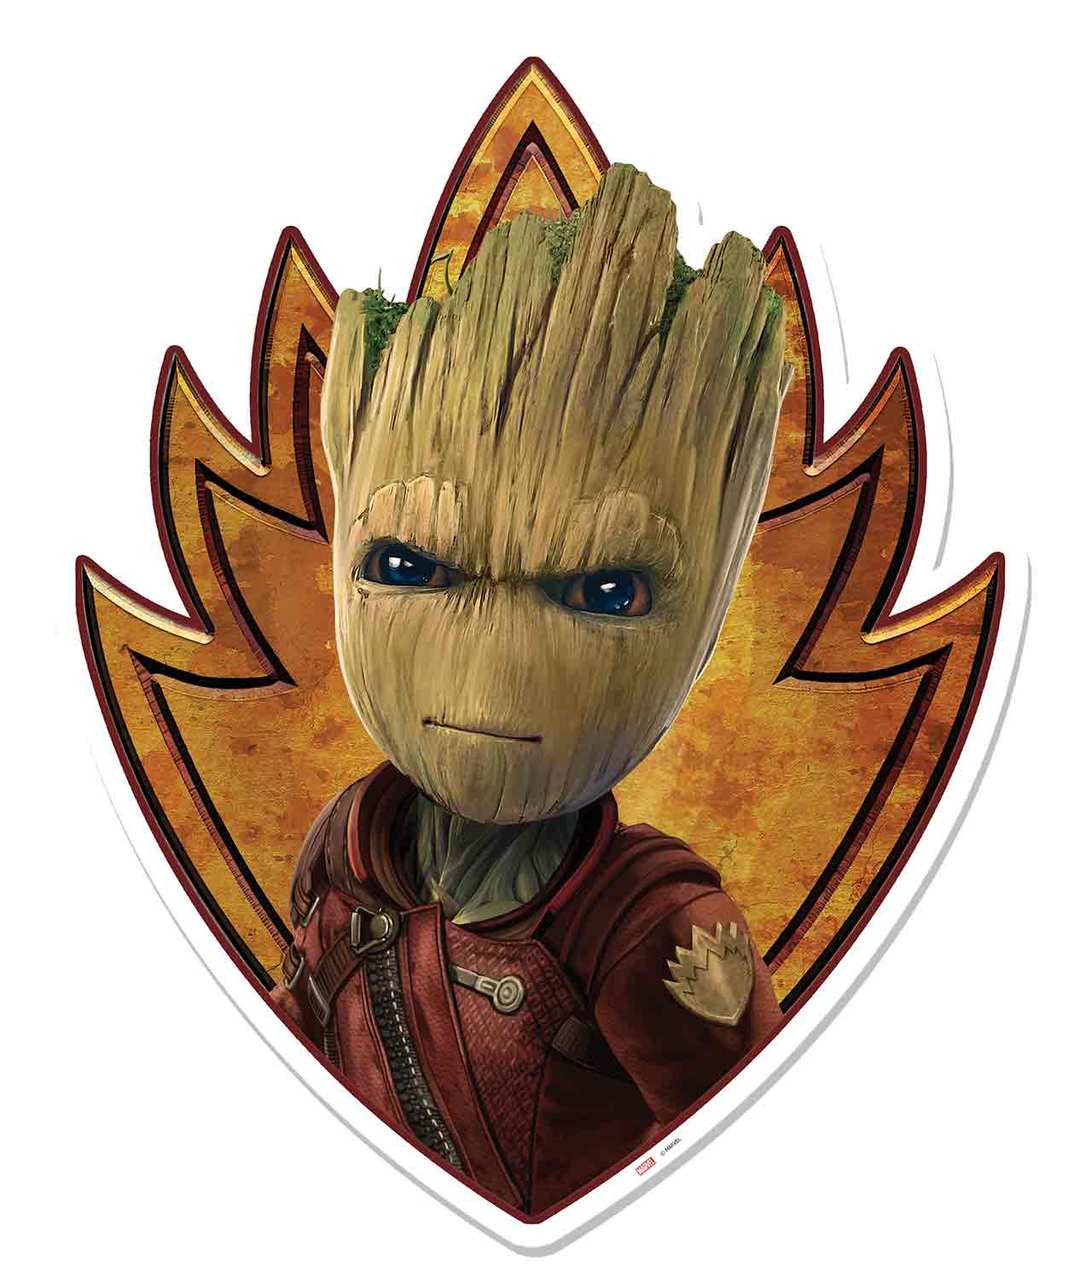 Sintético 97+ Foto guardians of the galaxy 2 baby groot Lleno